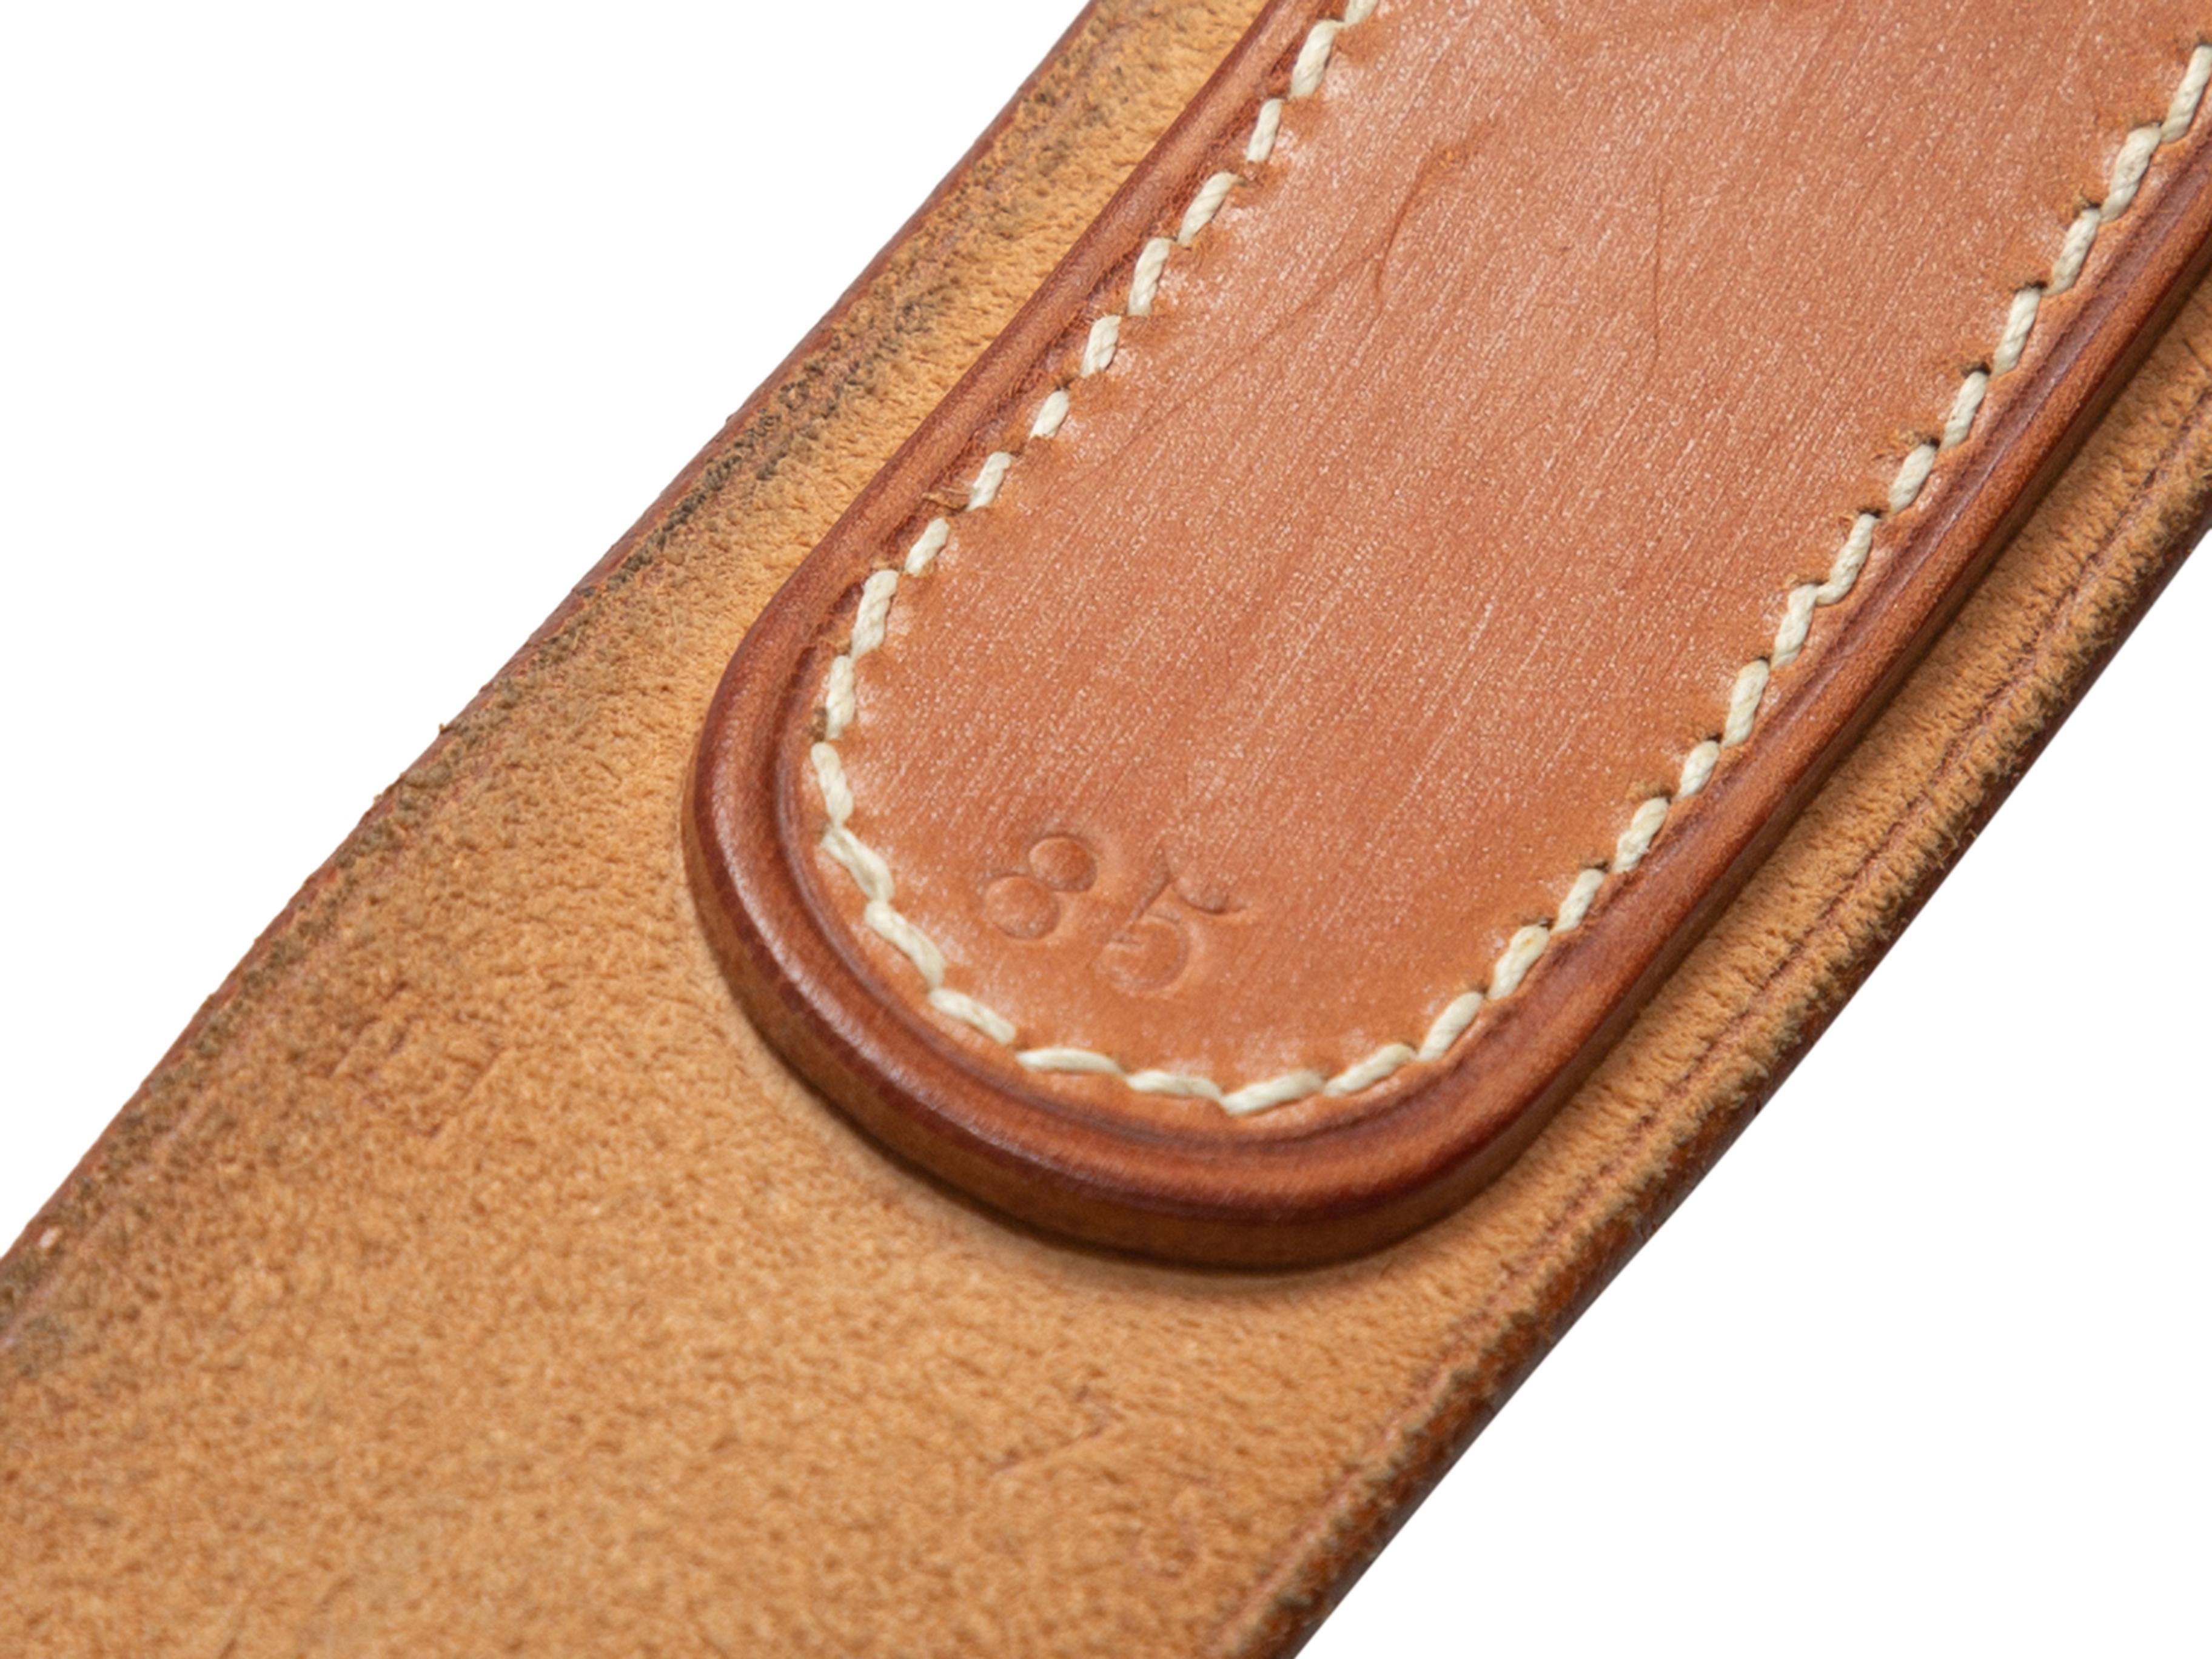 Product details: Tan leather belt by Hermes. Circa 2000. Silver-tone buckle closure. Designer size 85. 1.3